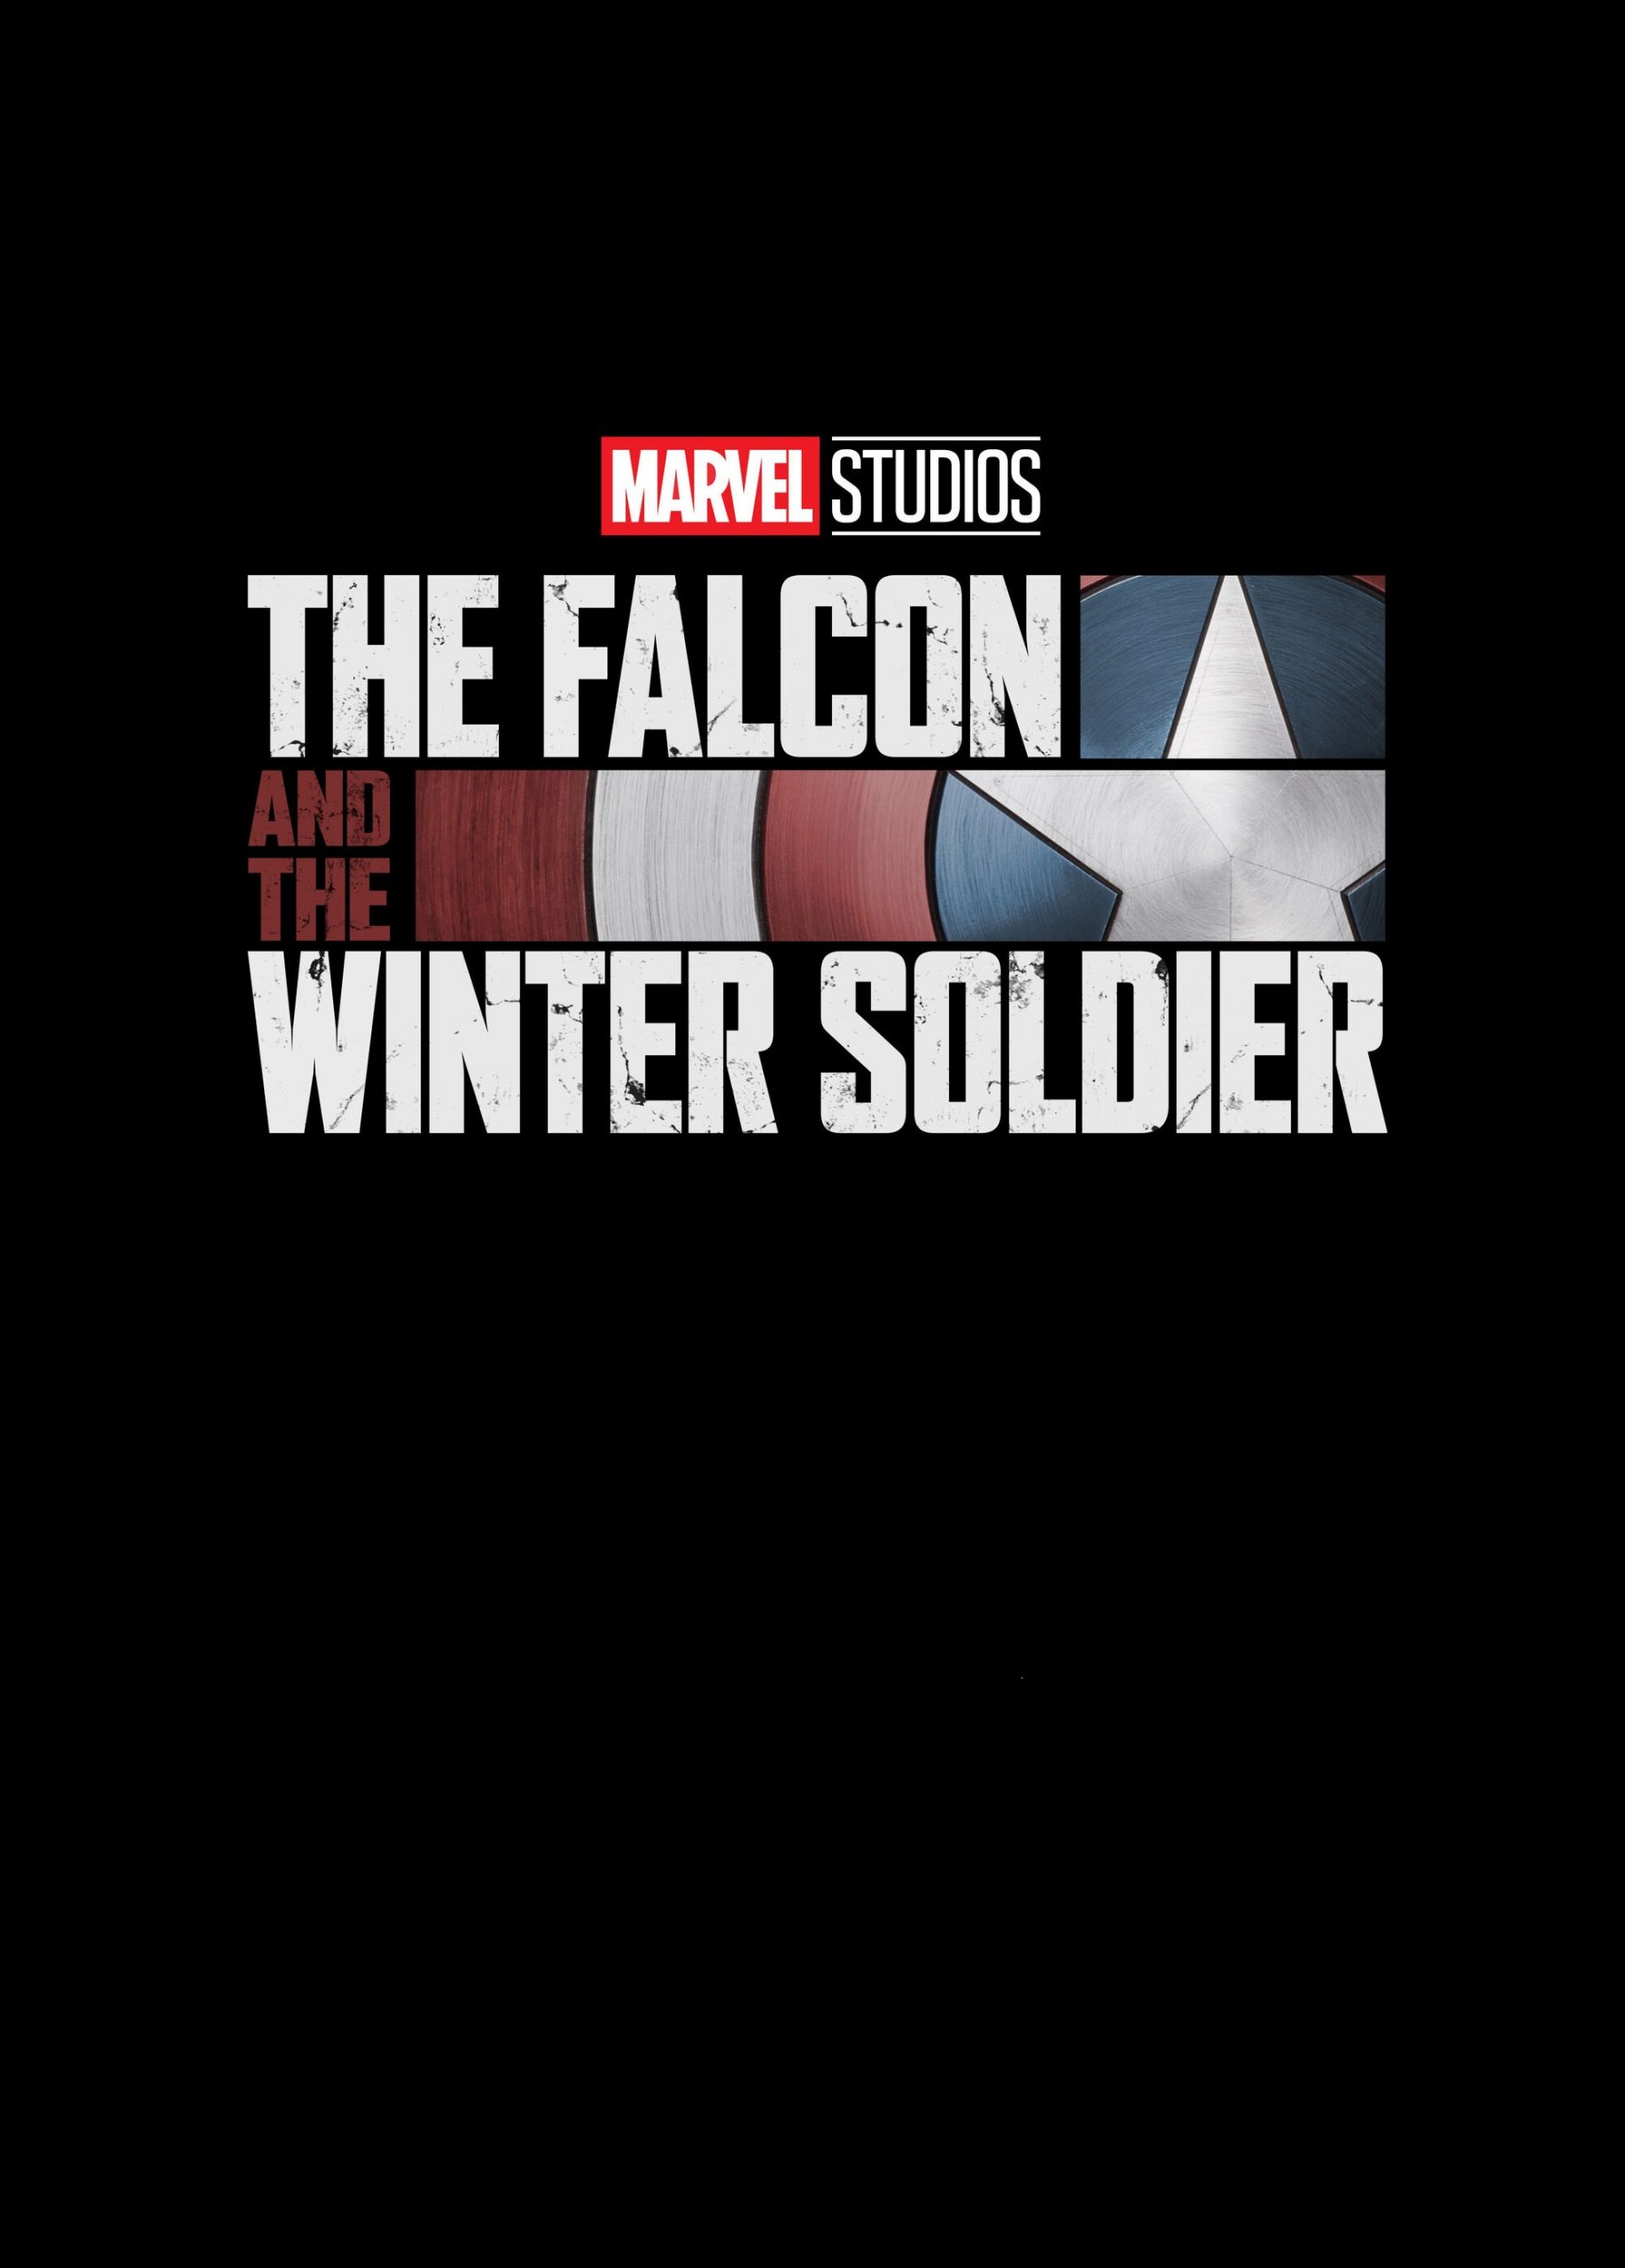 The Falcon and The Winter Soldier Season 2 Release Date, Cast, Plot and Watch Online